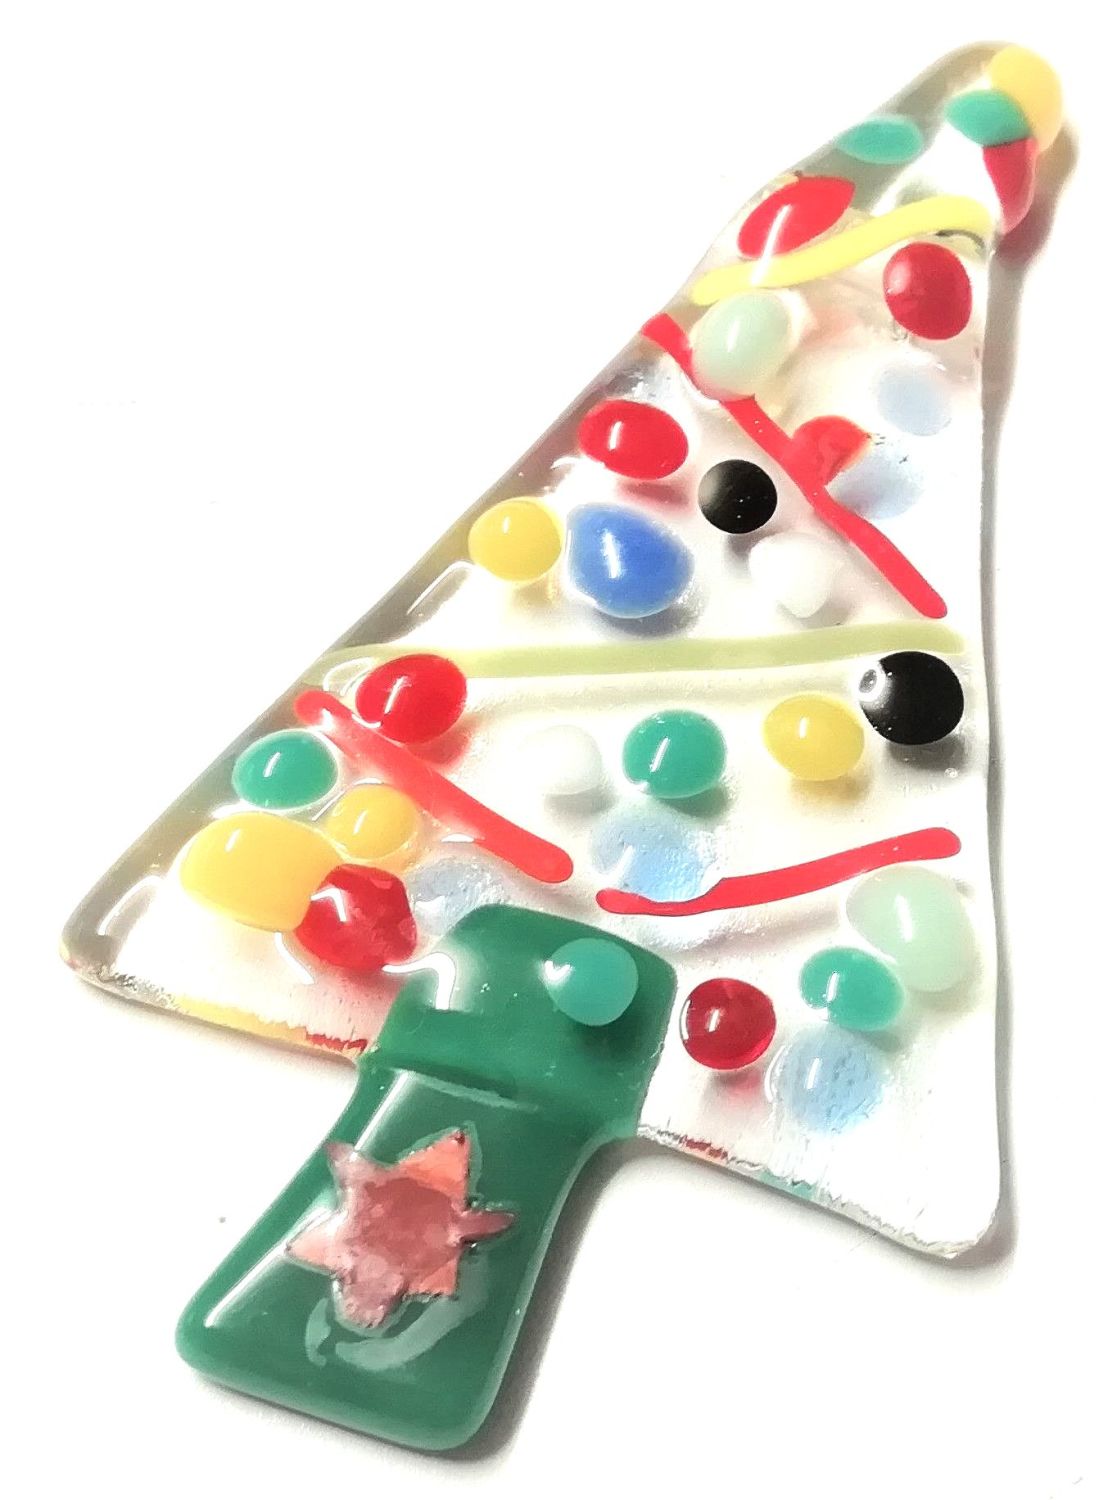 832 Making Fused Glass Christmas Decorations - Saturday 18th November 2022,